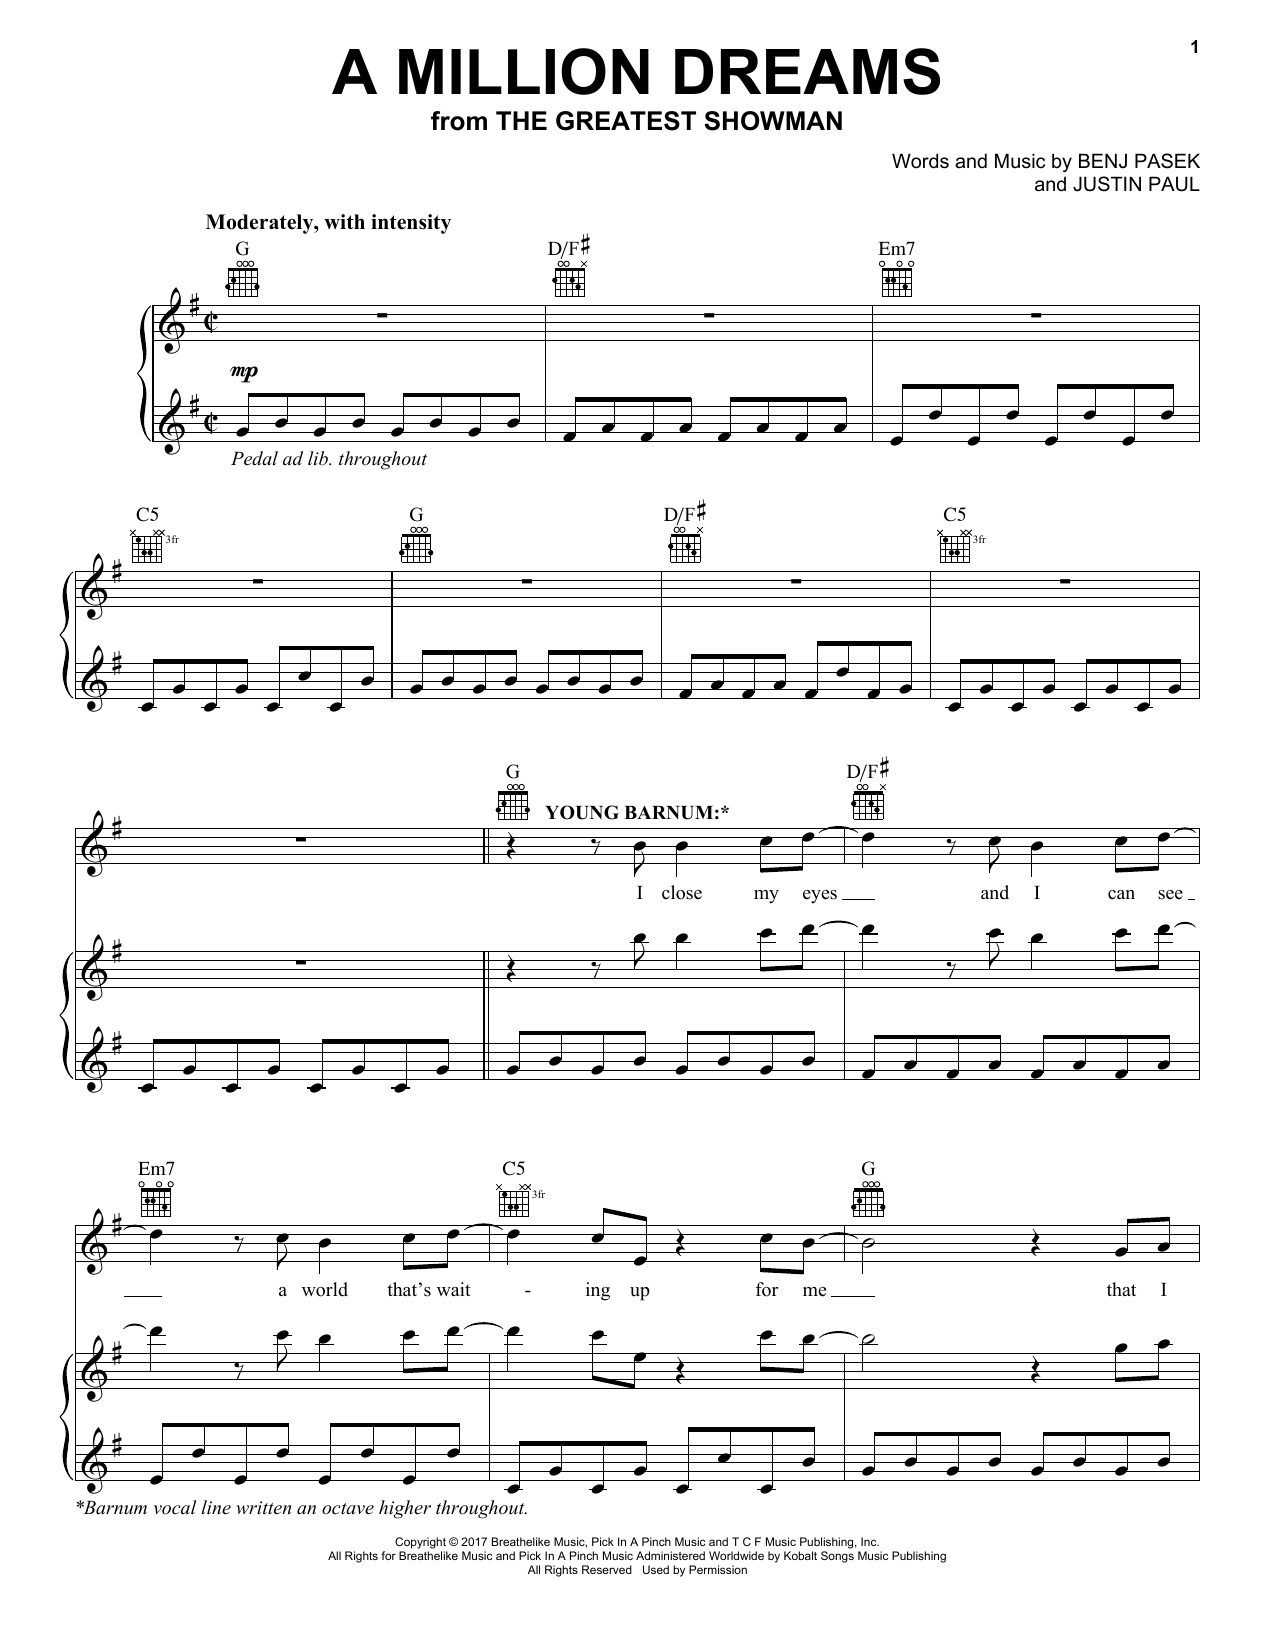 Pasek & Paul A Million Dreams (from The Greatest Showman) sheet music notes printable PDF score